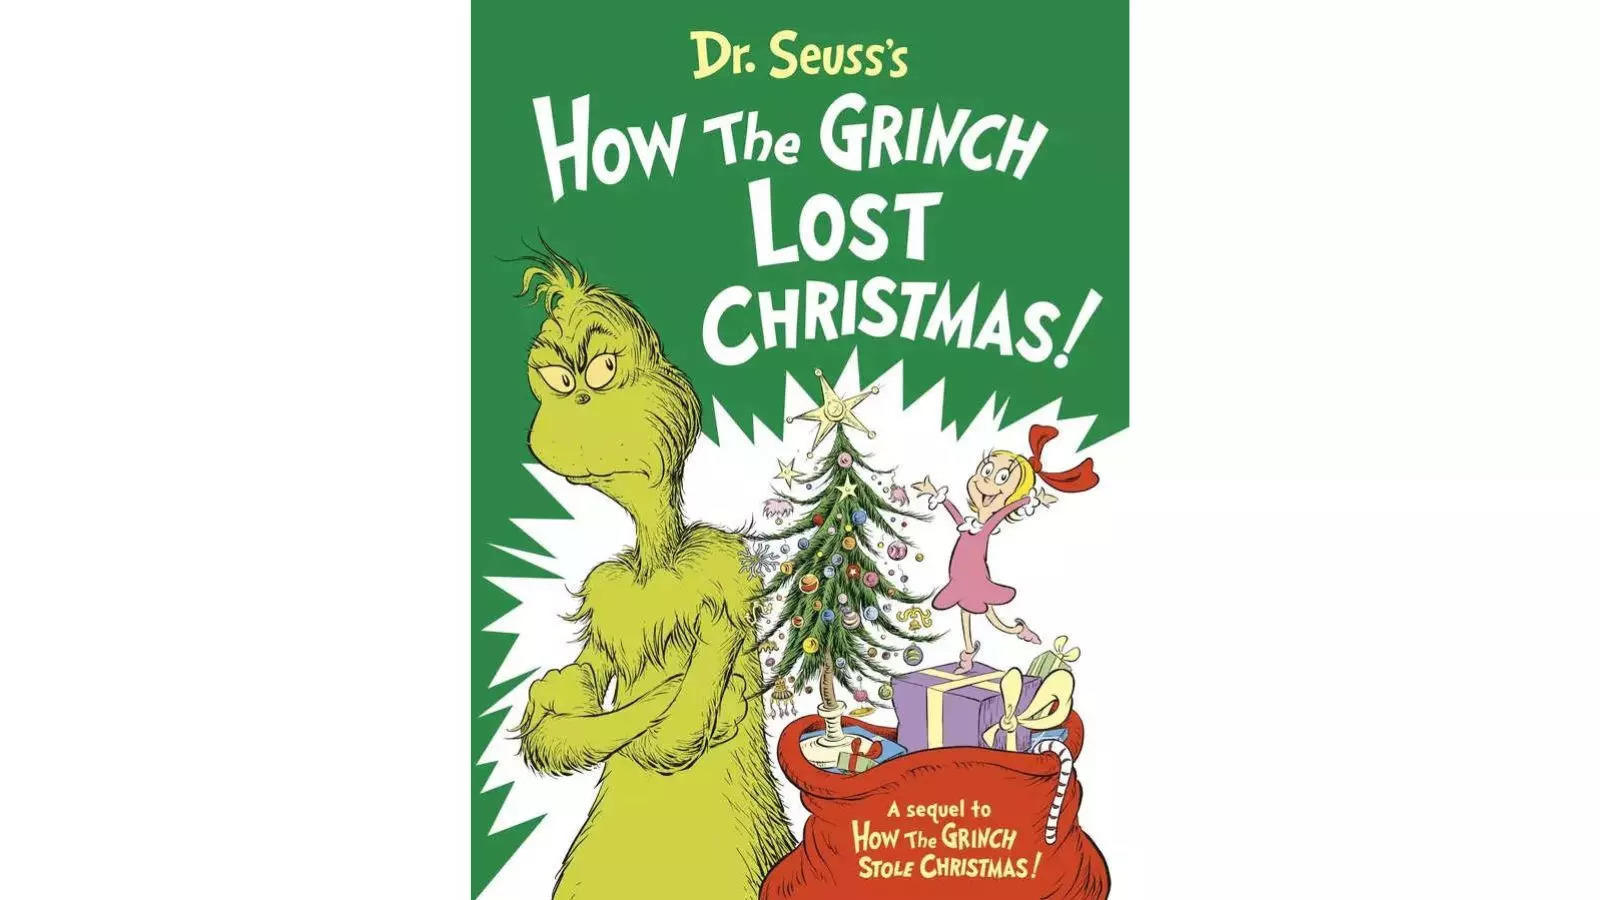 Good news for Dr. Seuss fans! 1957 classic children's book 'How the Grinch  stole Christmas!' gets a sequel - The Economic Times